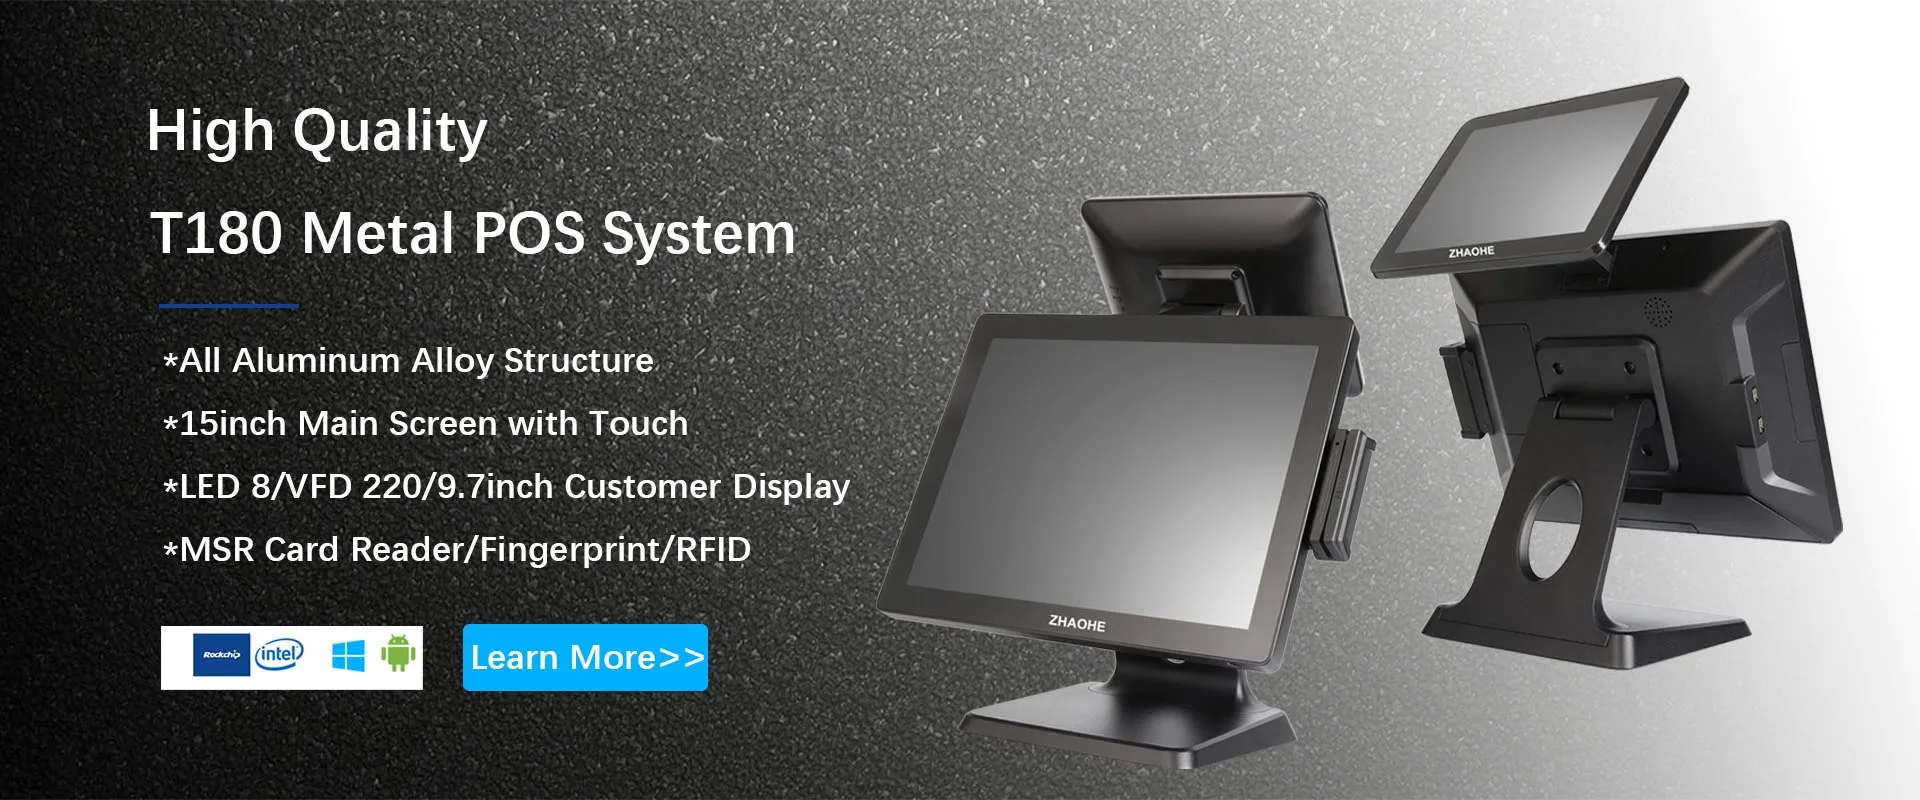 zhaohepos 15inch all aluminum pos system